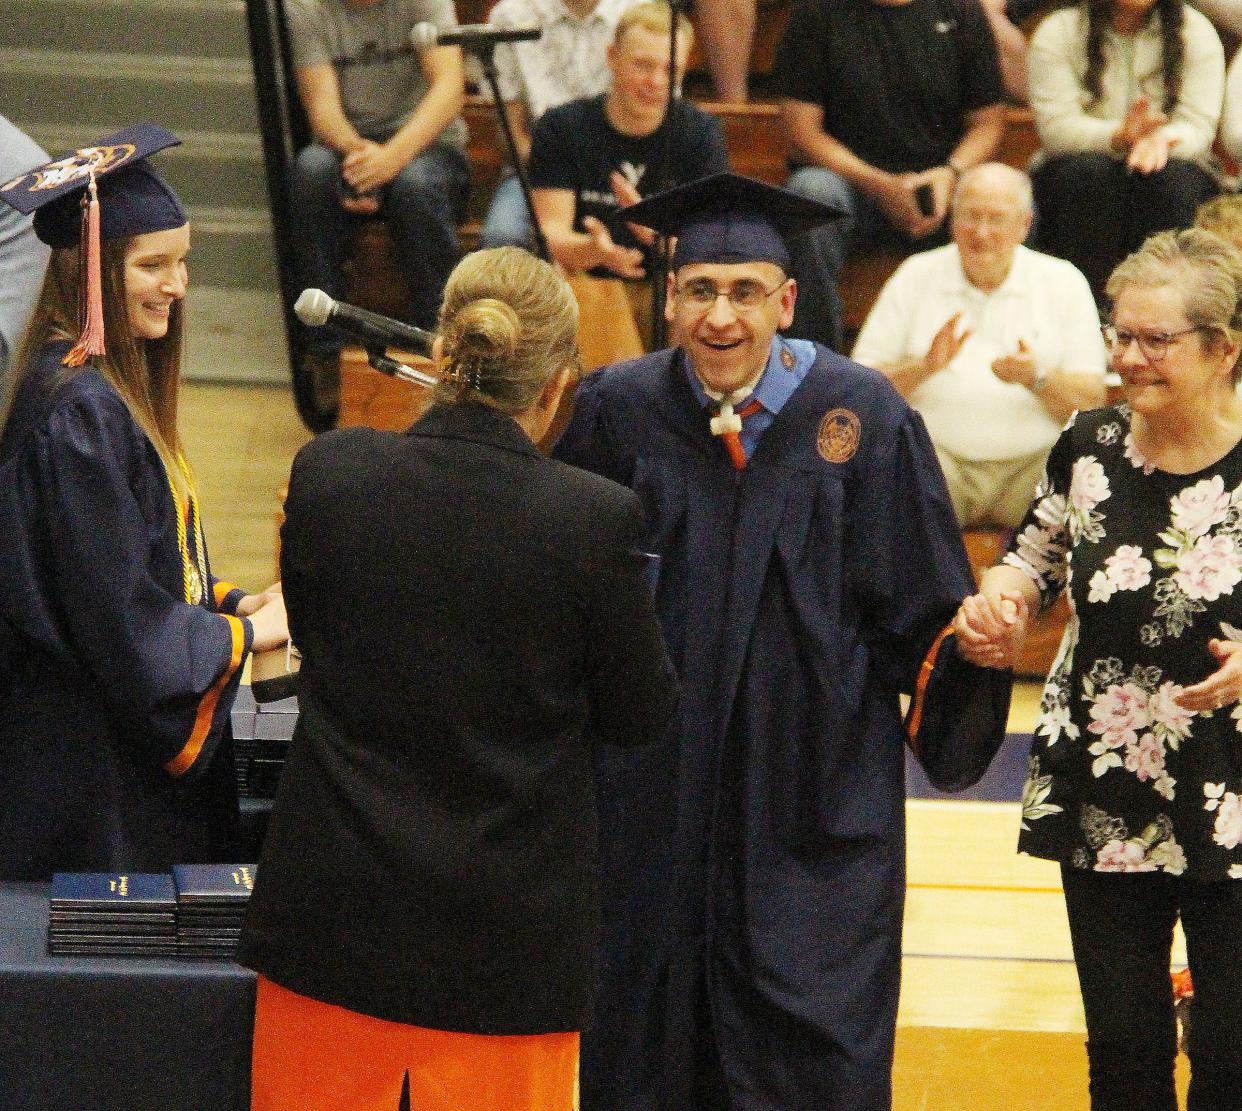 Sergio Gonzalez is all smiles as he receives his diploma from Pontiac Township High School District 90 board member Mary Brainard during graduation ceremonies Sunday at PTHS.